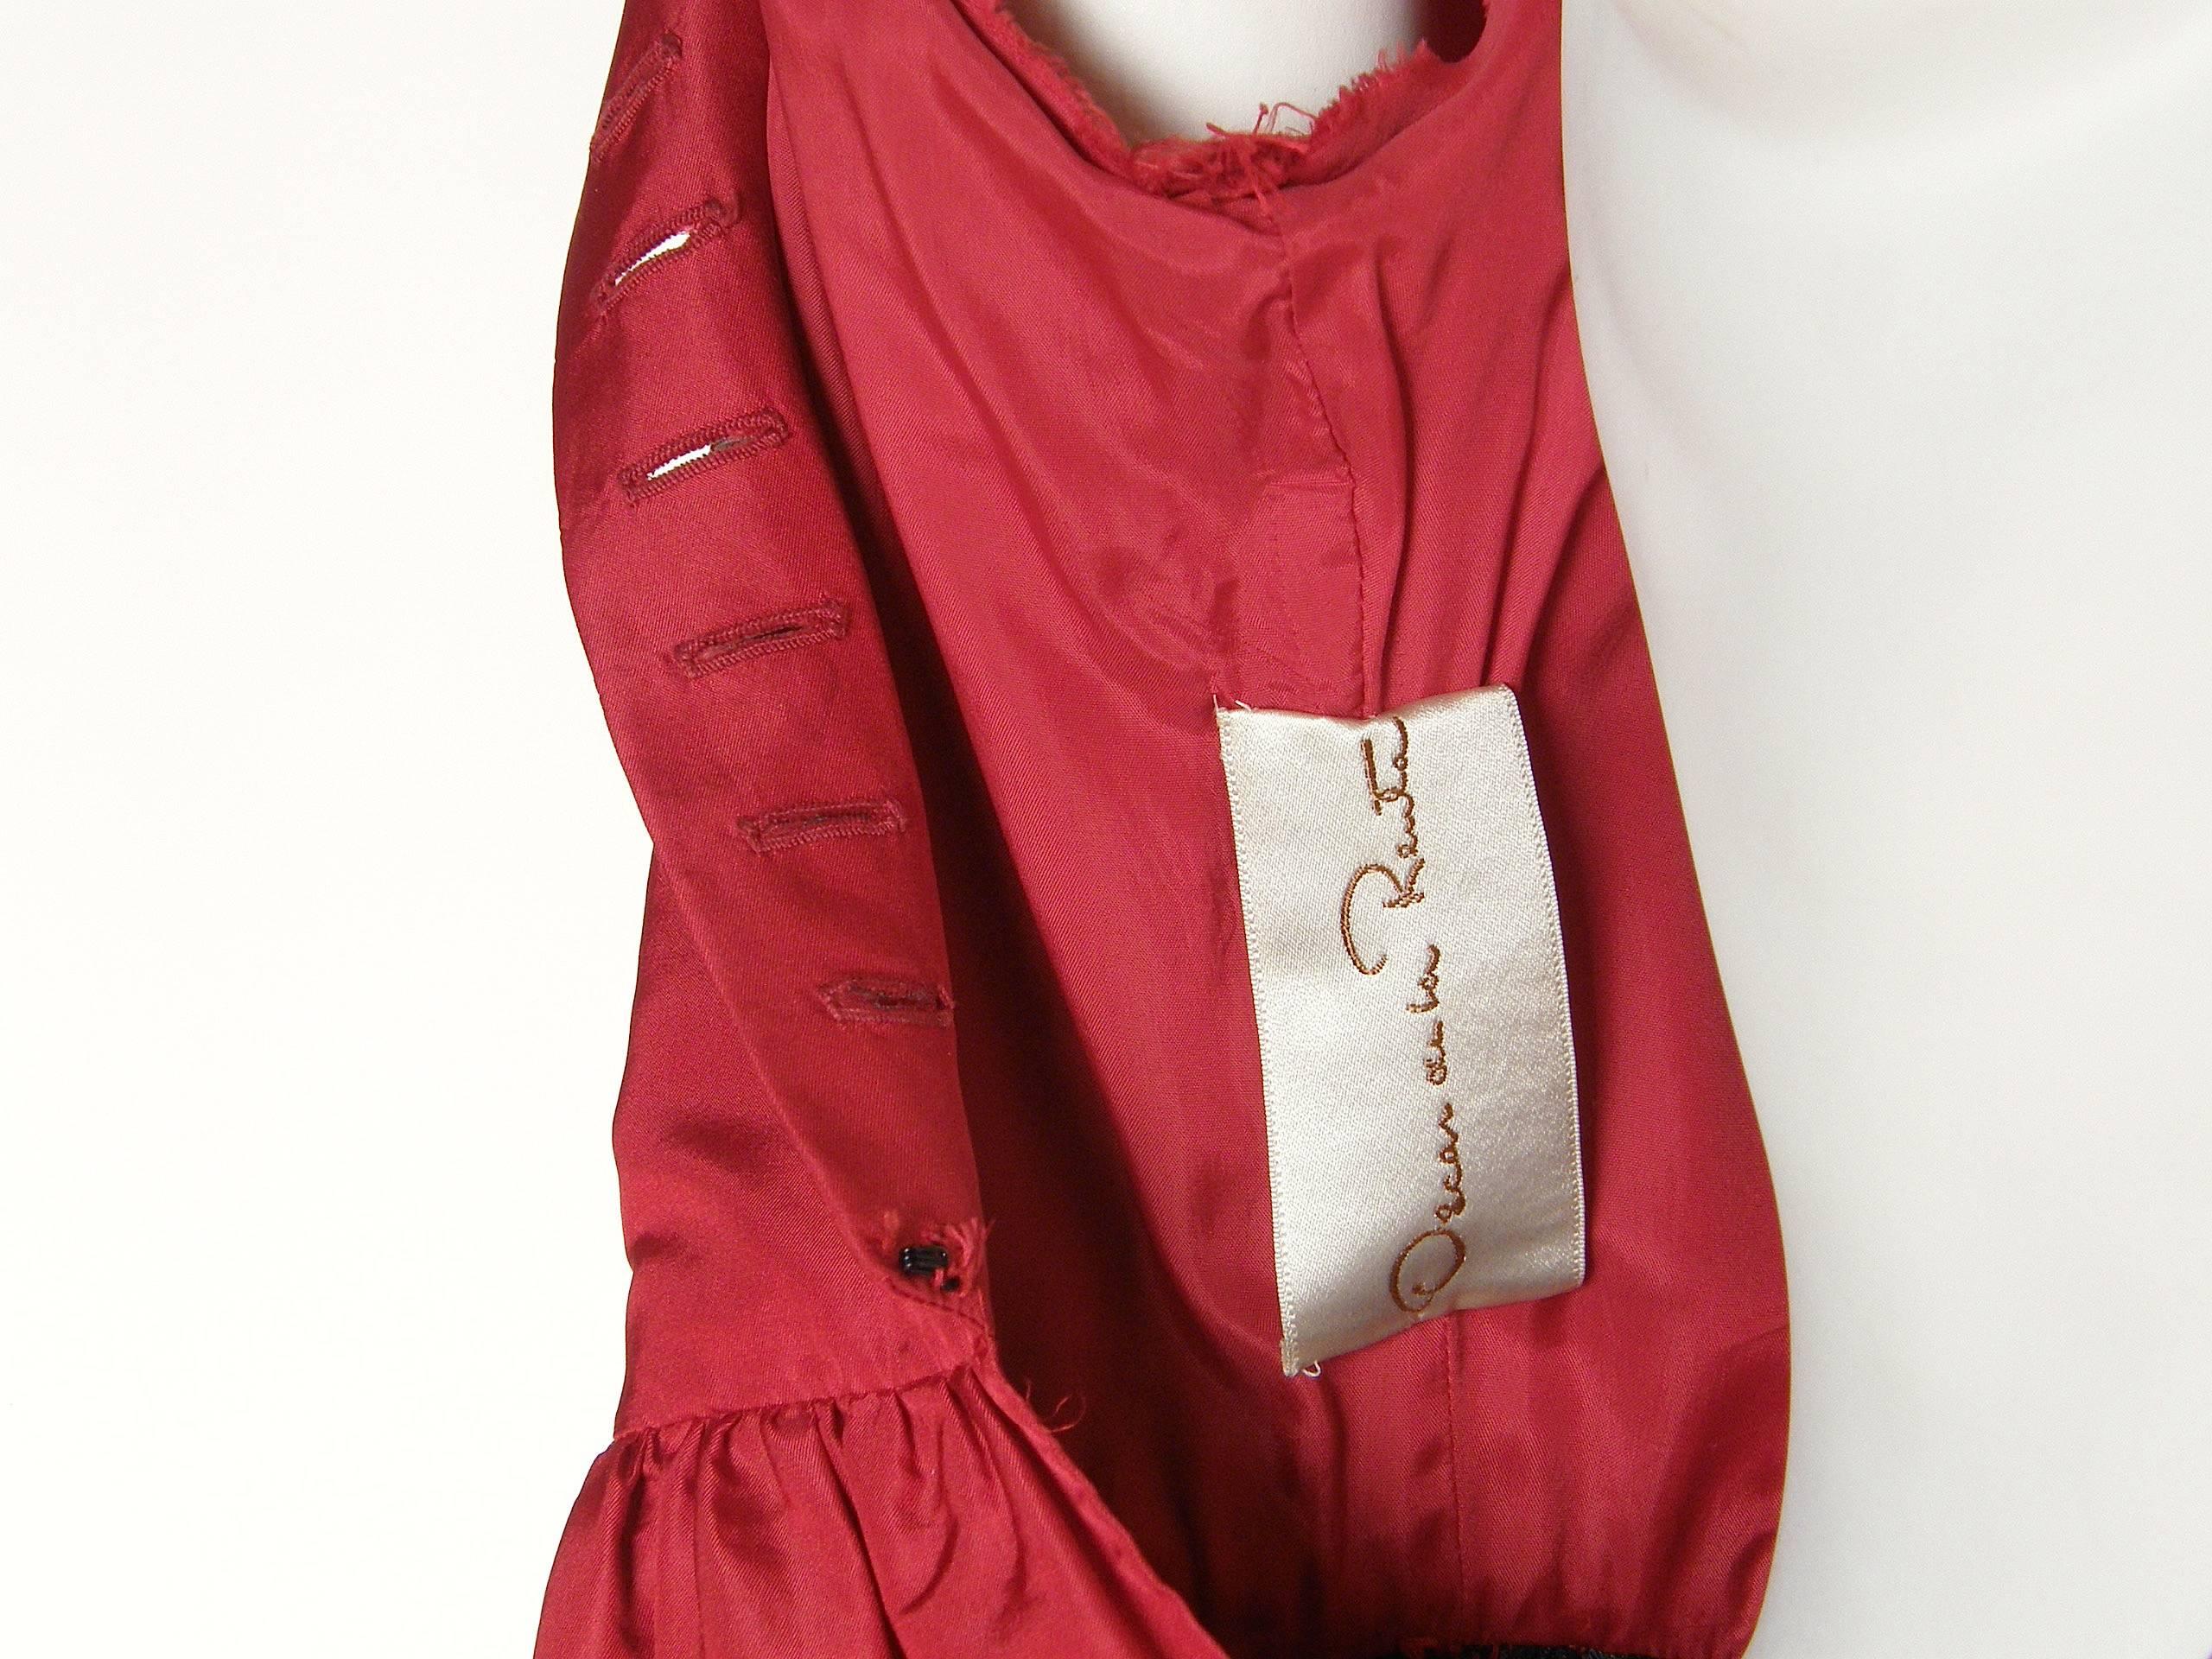 Oscar de la Renta Red Silk Taffeta Gown with Tiered Skirt and Ruffled Cuffs For Sale 3